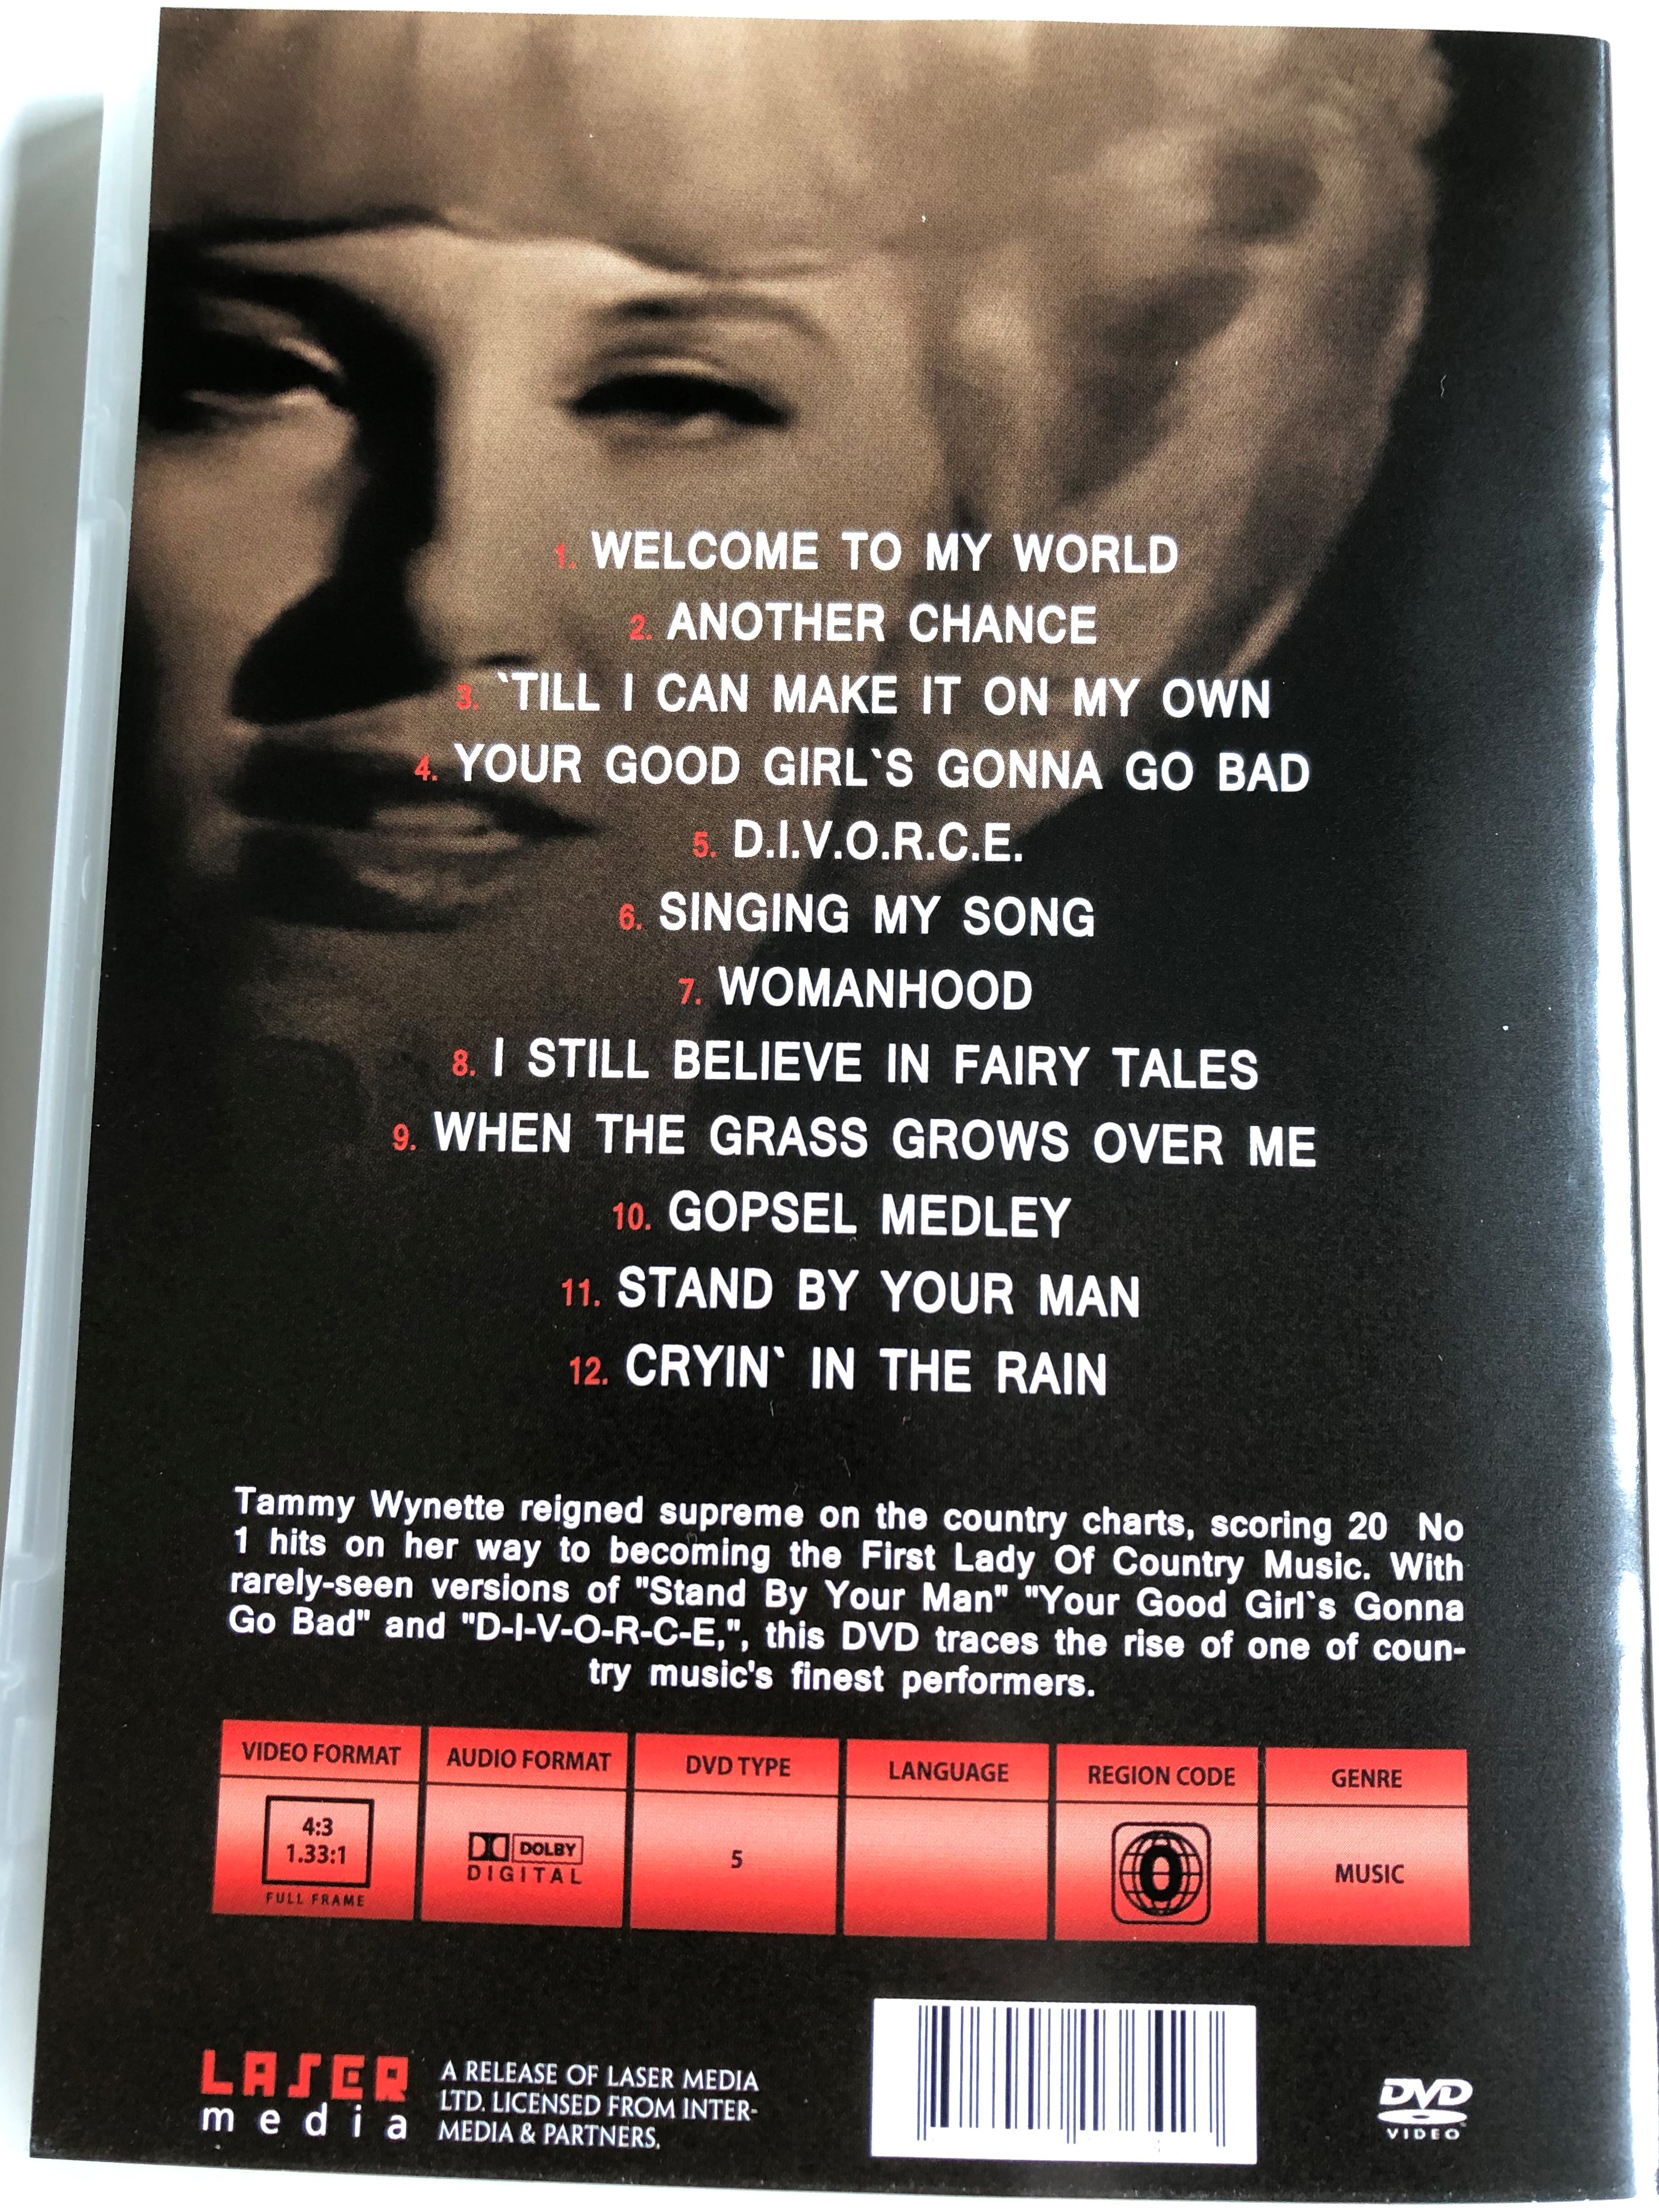 tammy-wynette-stand-by-your-man-dvd-the-ultimate-collection-2.jpg